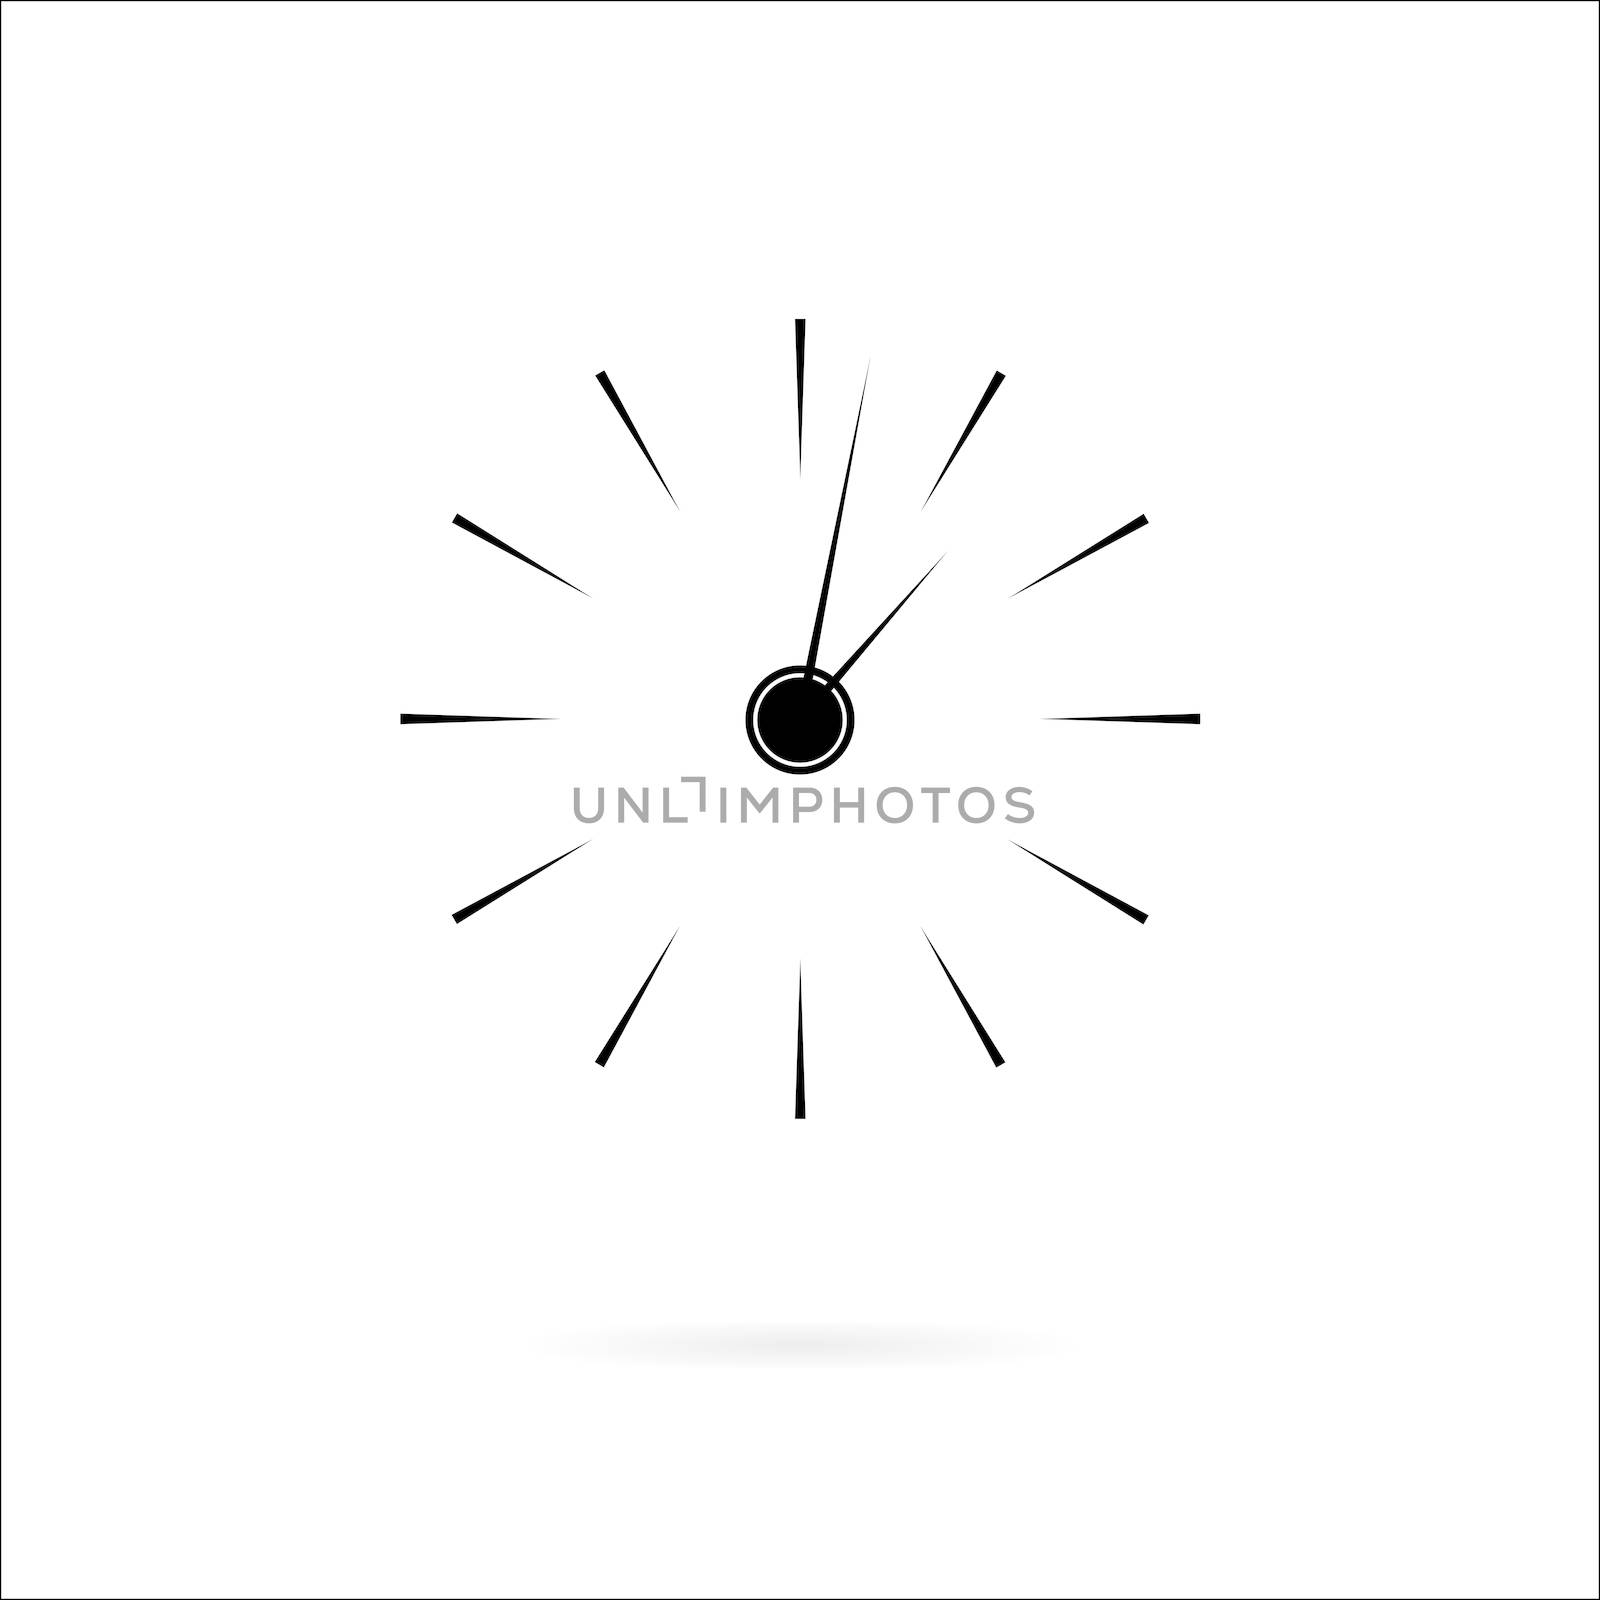 An Illustration of a Clock